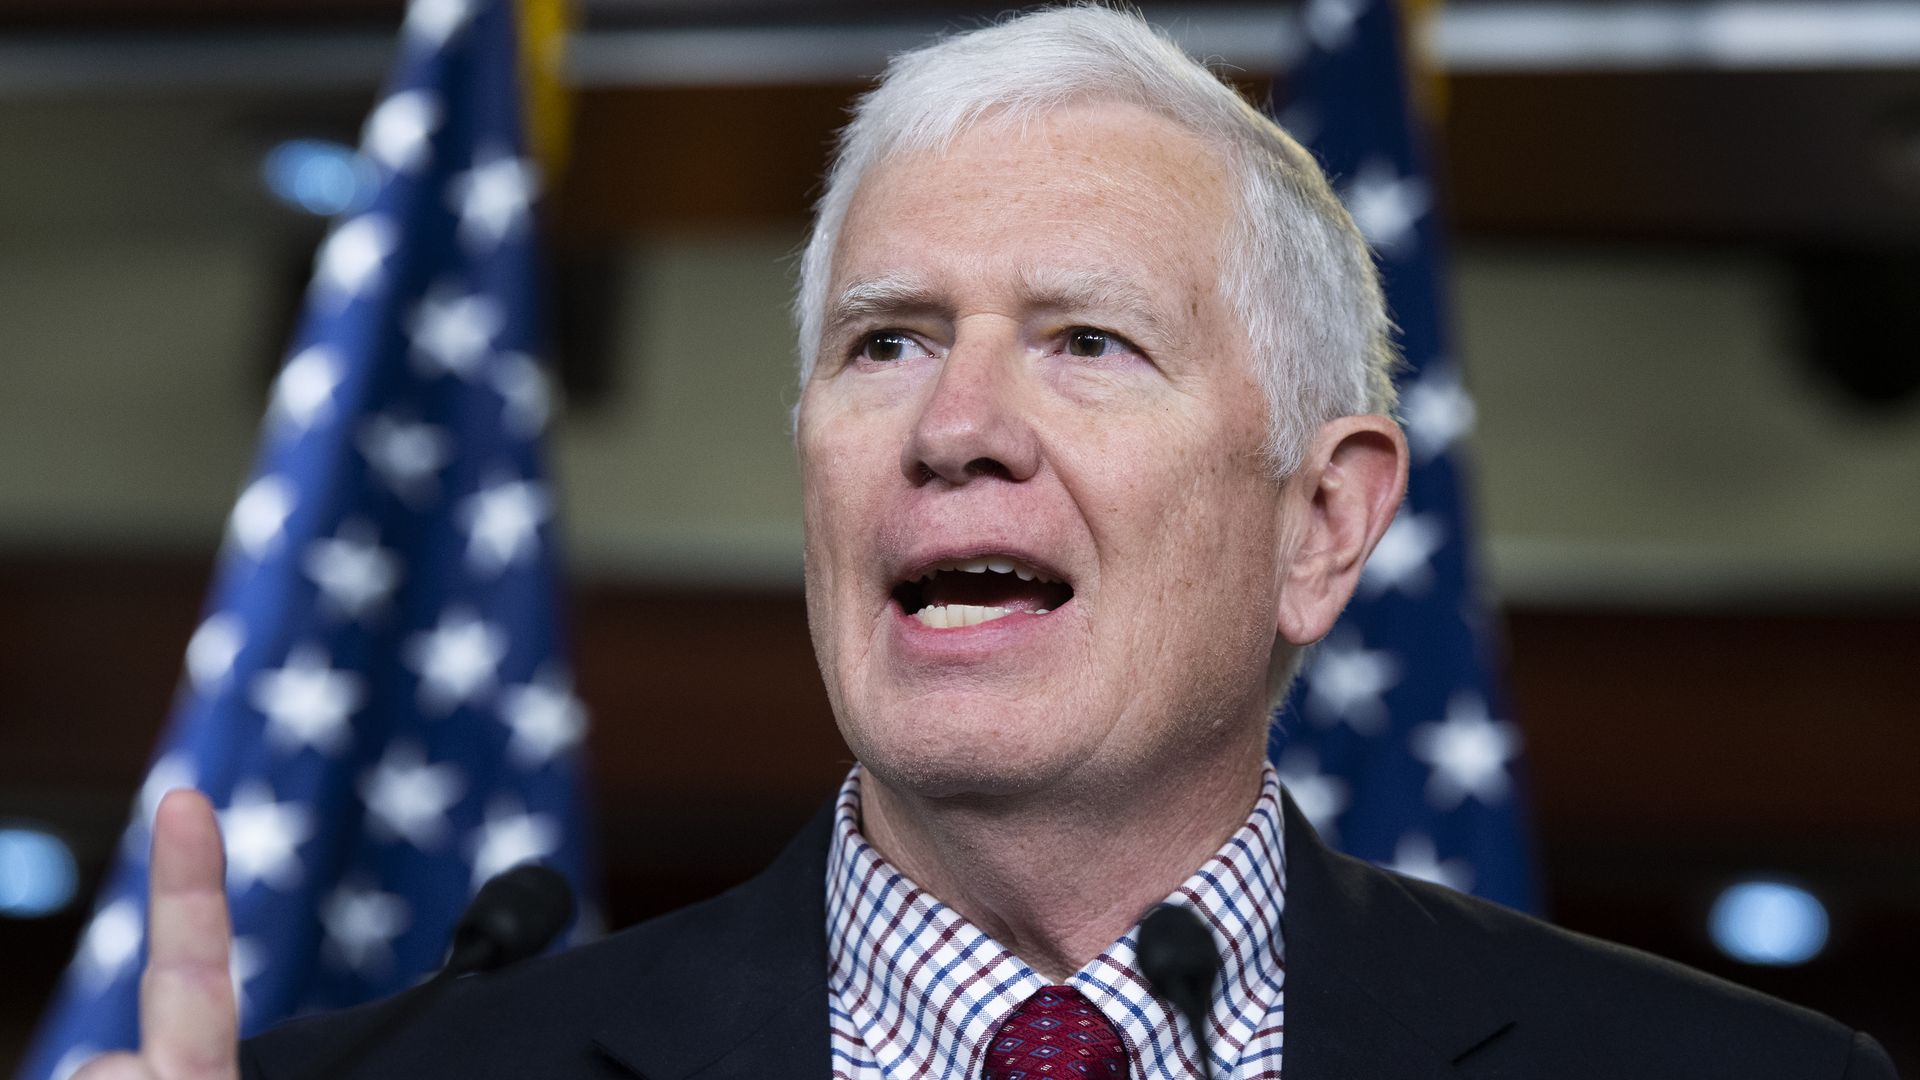 Rep. Mo Brooks (R-Ala.) speaking during a news conference in Congress in June 2021.